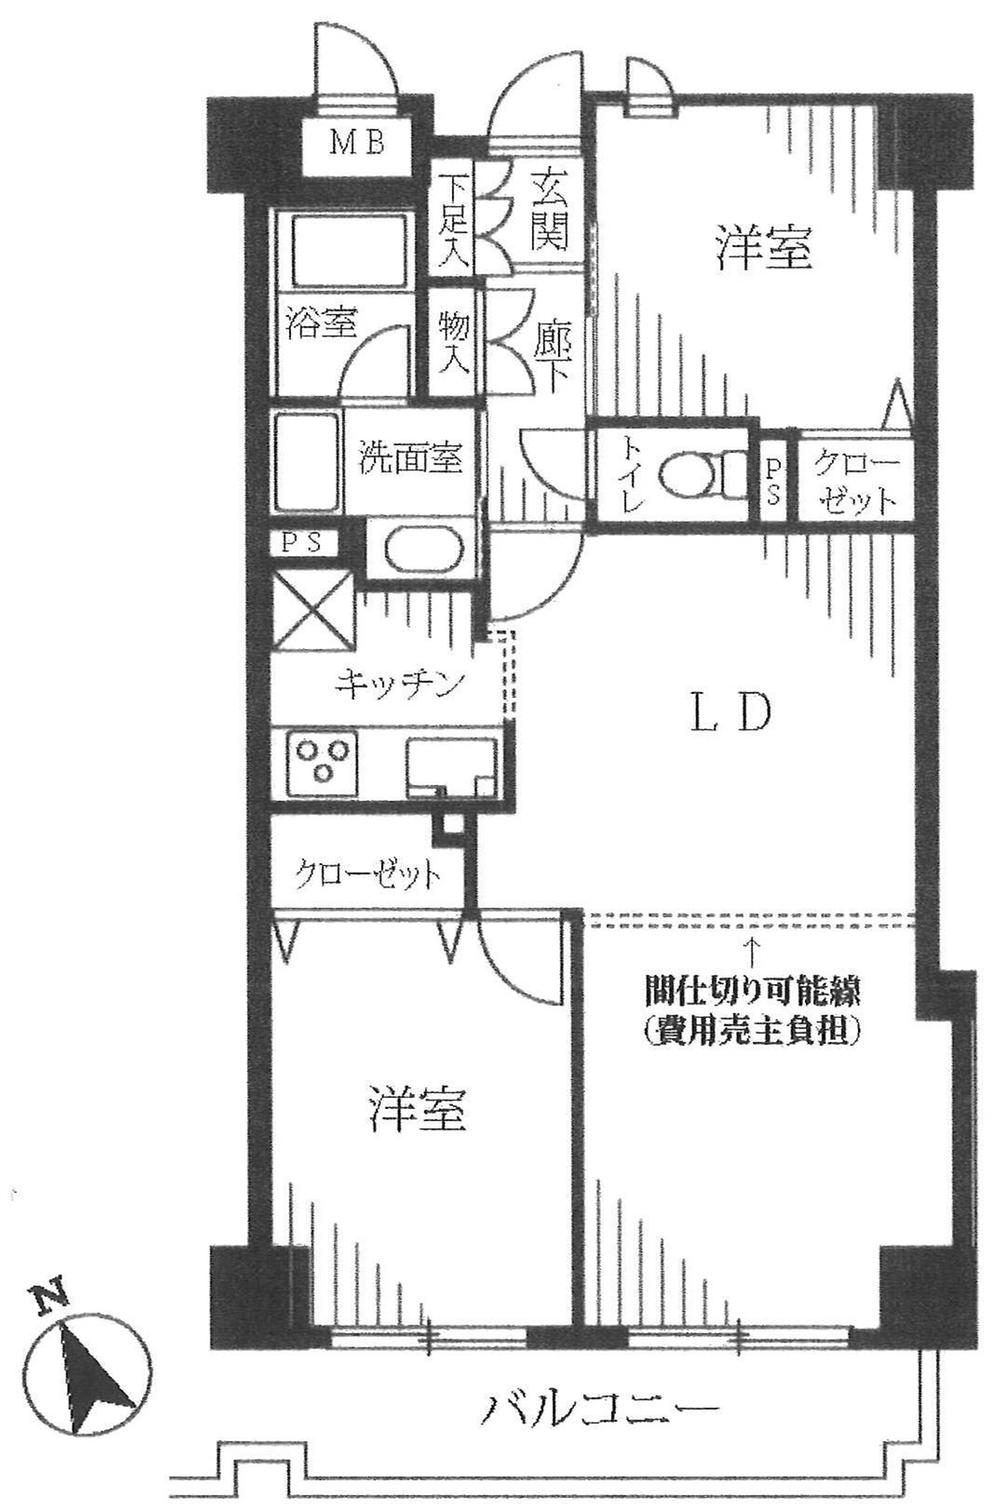 Floor plan. 2LDK, Price 37,800,000 yen, Occupied area 60.39 sq m , Balcony area 7.25 sq m new interior already Mansion. You can change the floor plan to 3DK.